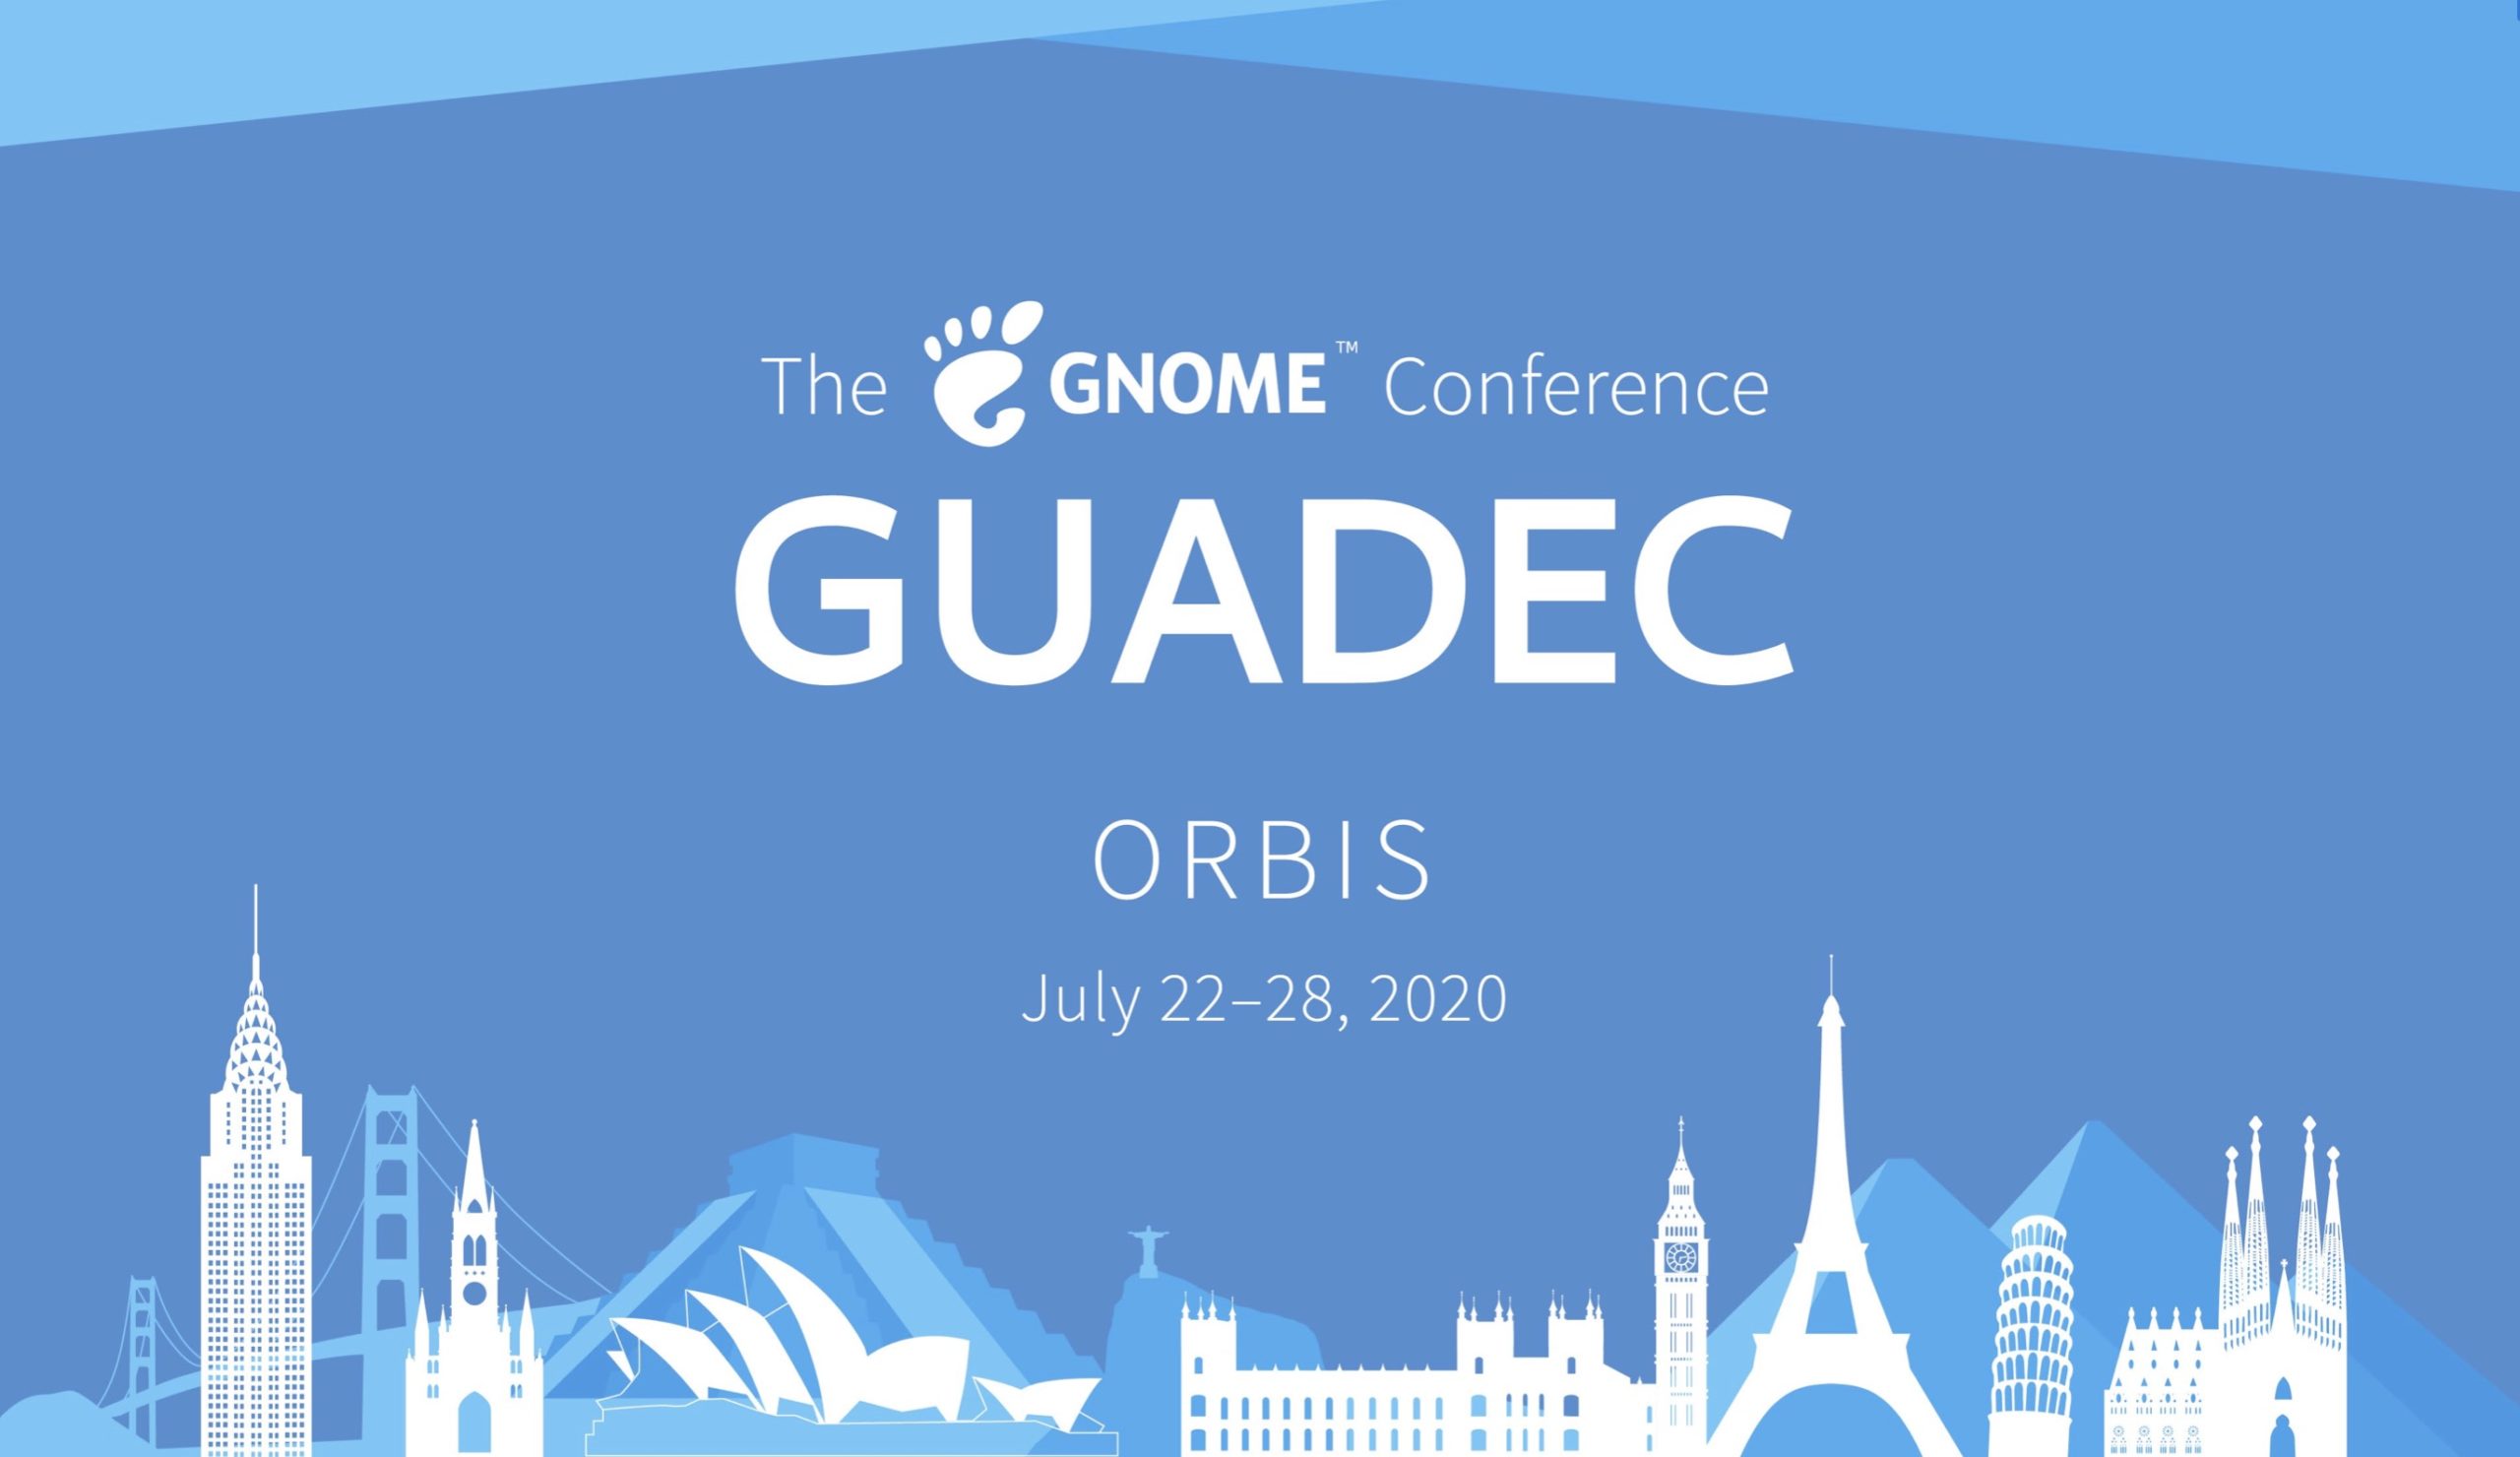 GUADEC 2020 Kicks Off Today as GNOME’s First Virtual Conference